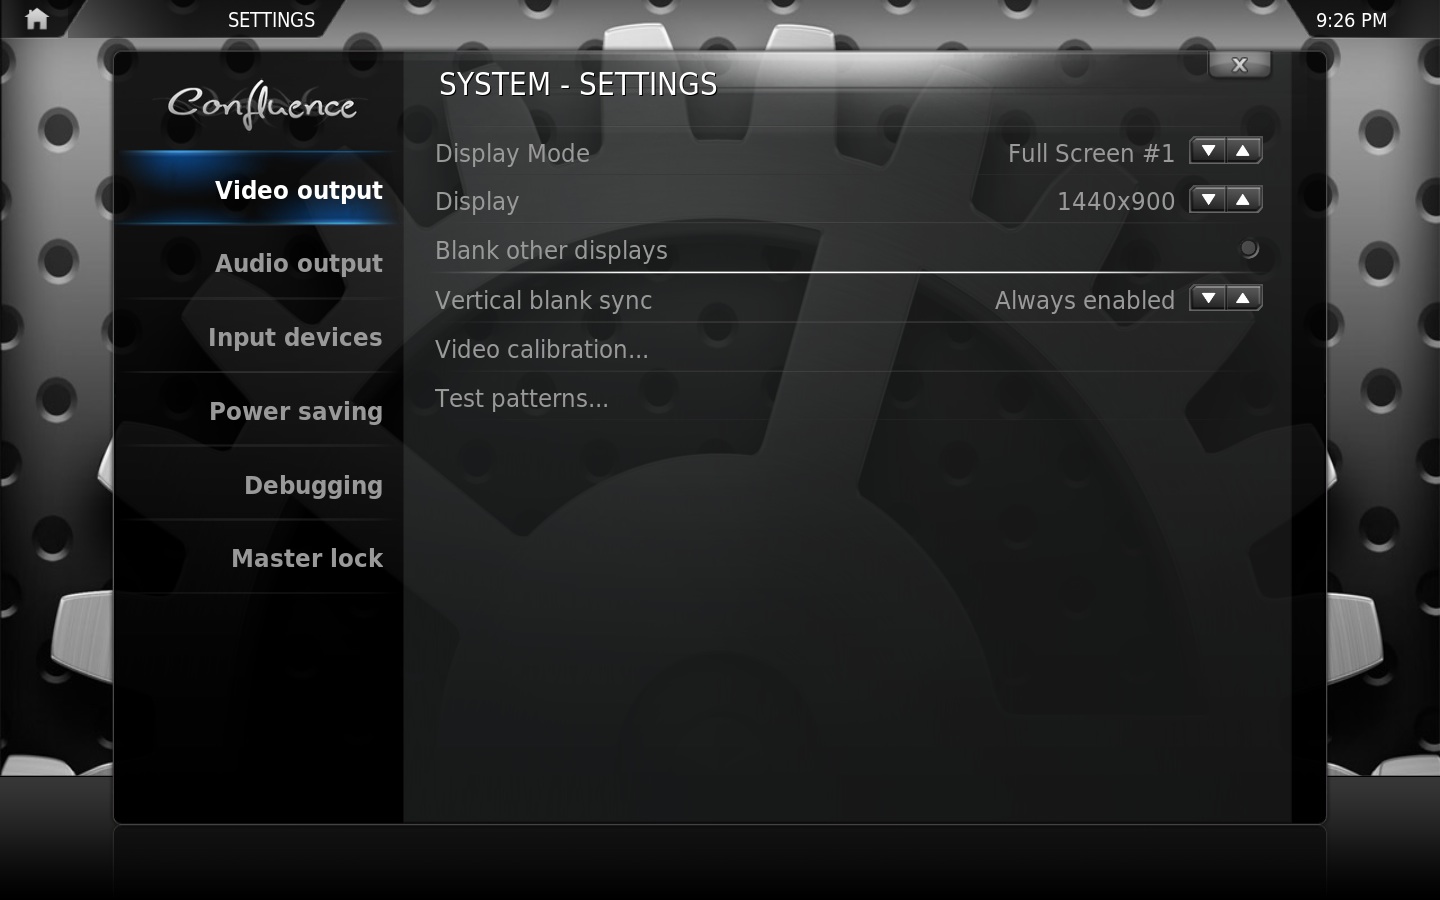 File:Settings.system.video output.jpg